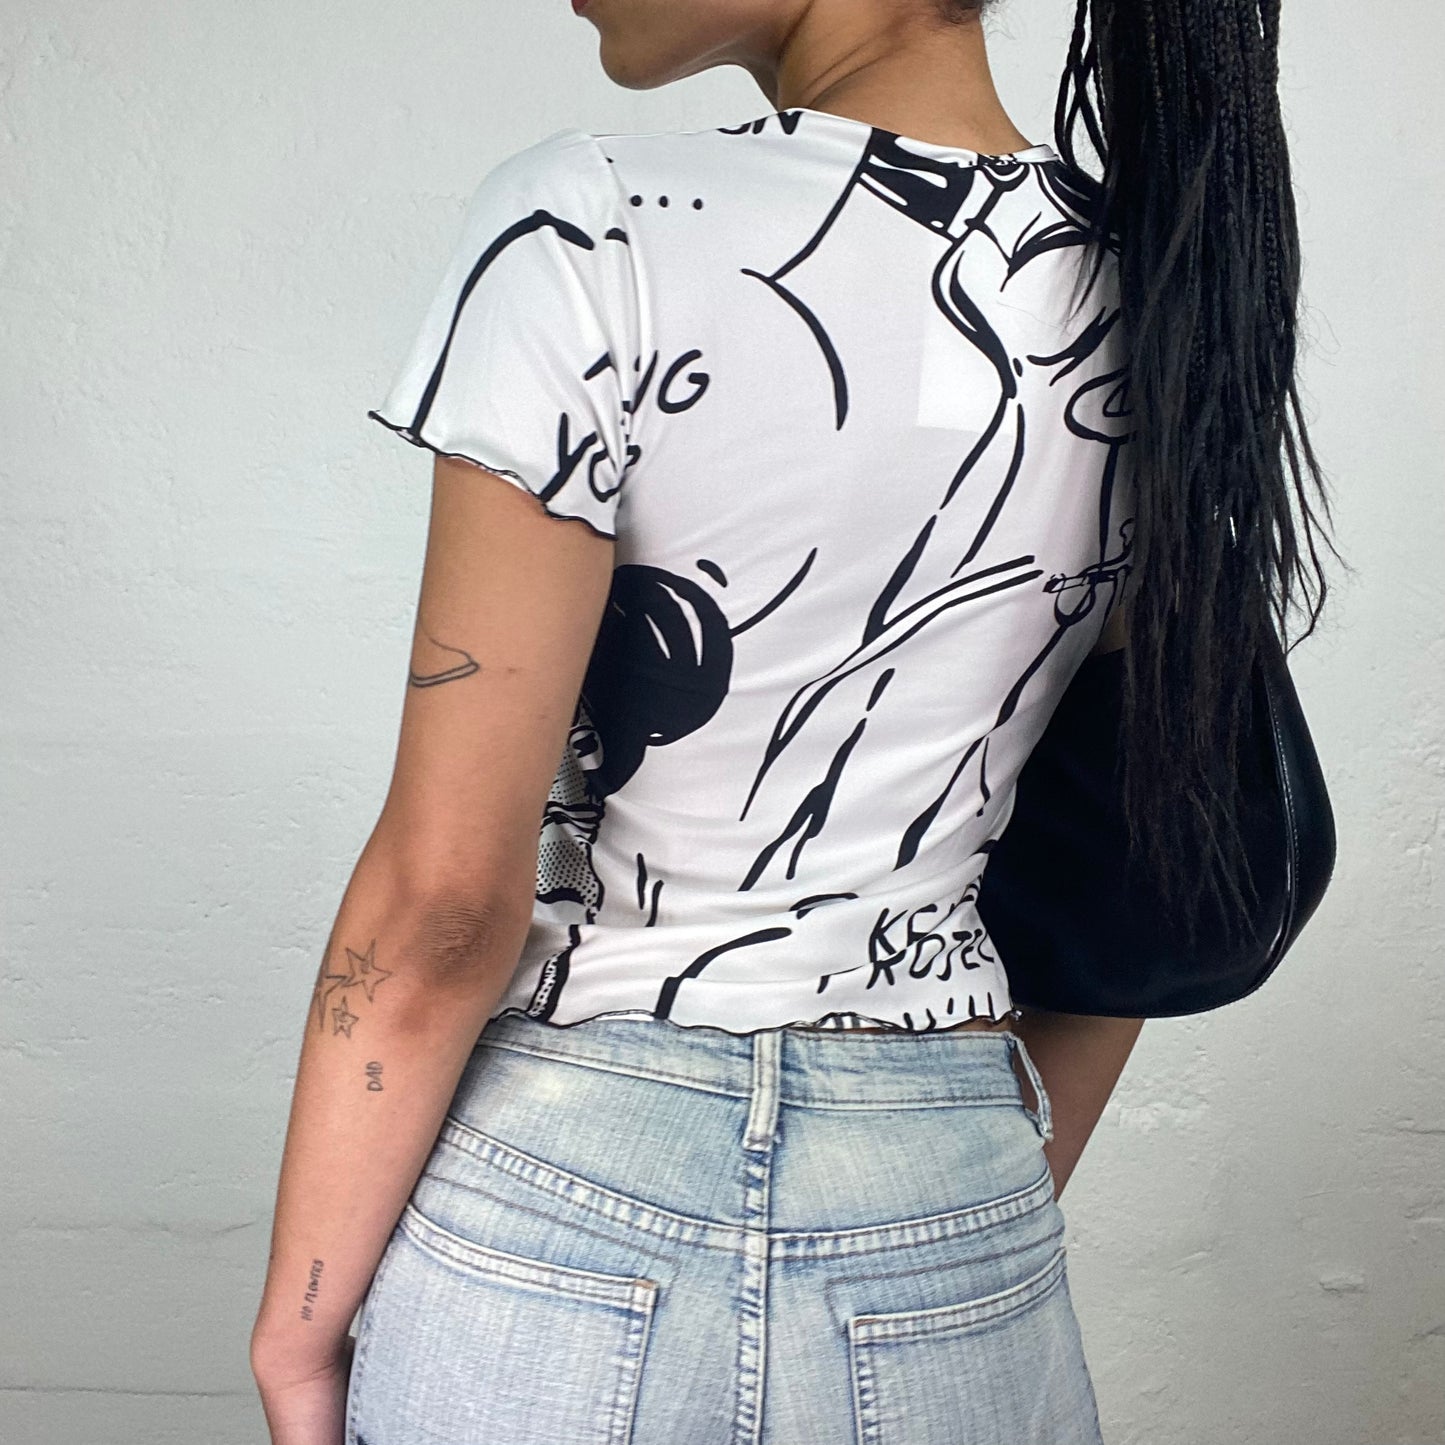 Vintage 2000’s Downtown Girl White Baby Tee with Black Pop Art Comics Print (S)